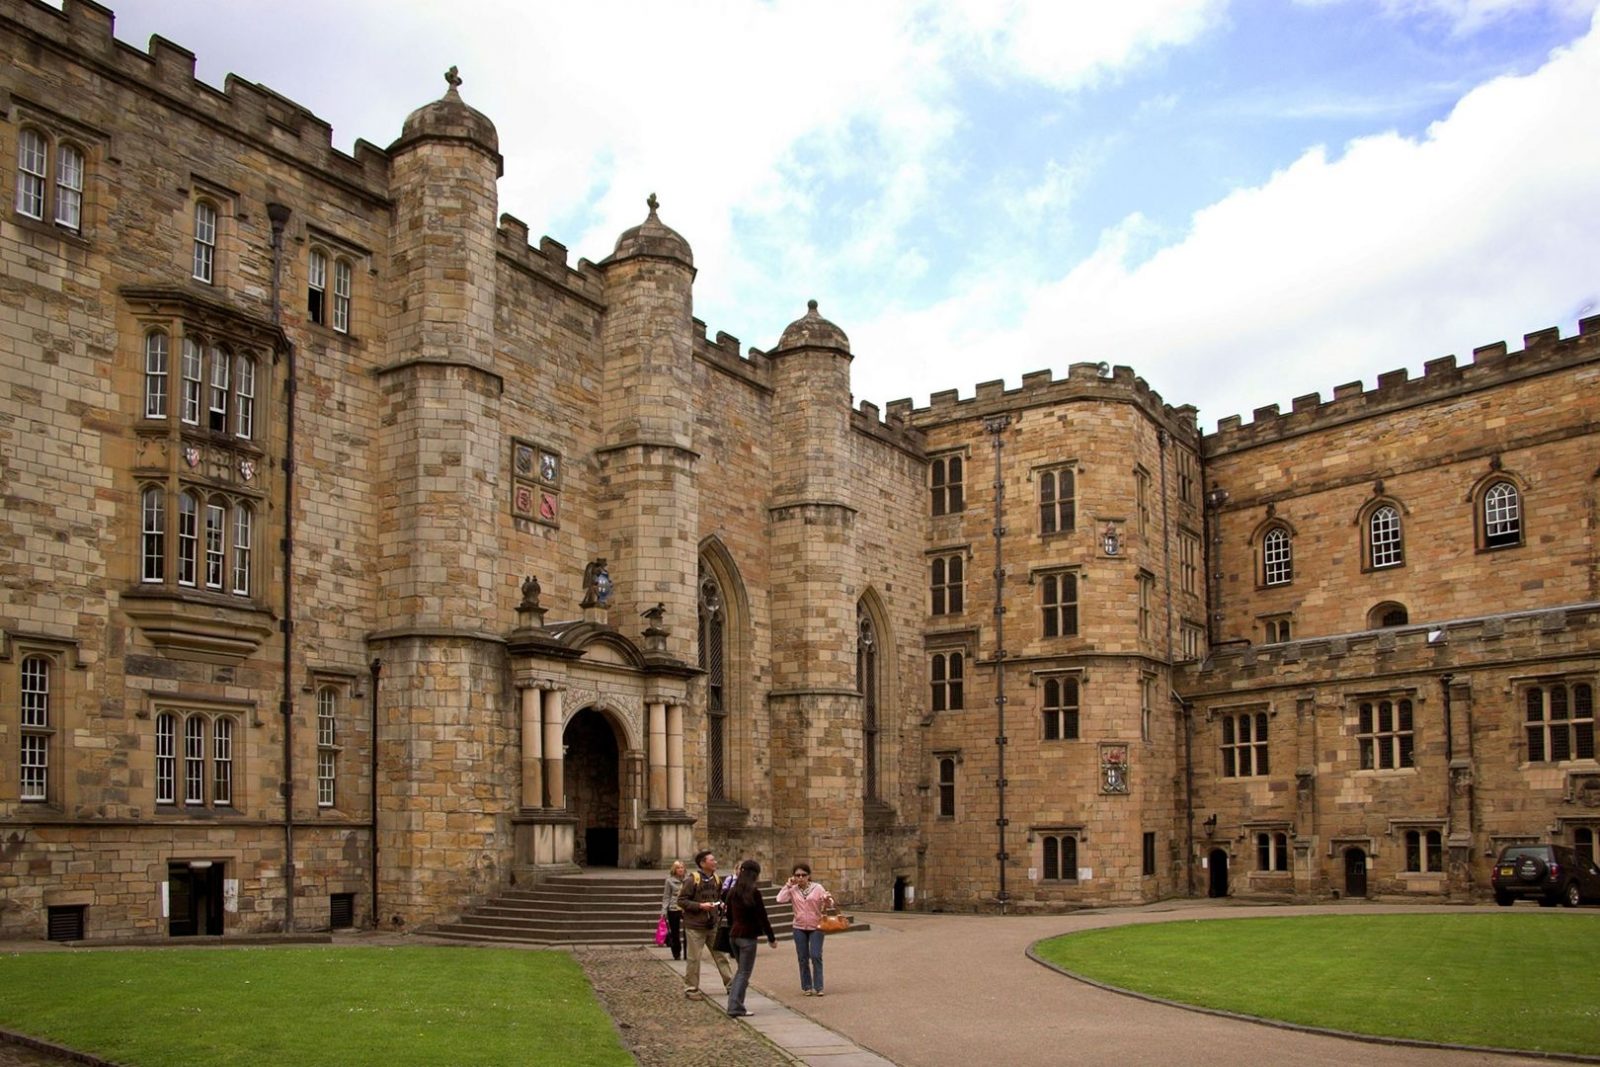 DURHAM UNIVERSITY - One of the top universities in the UK for international students.